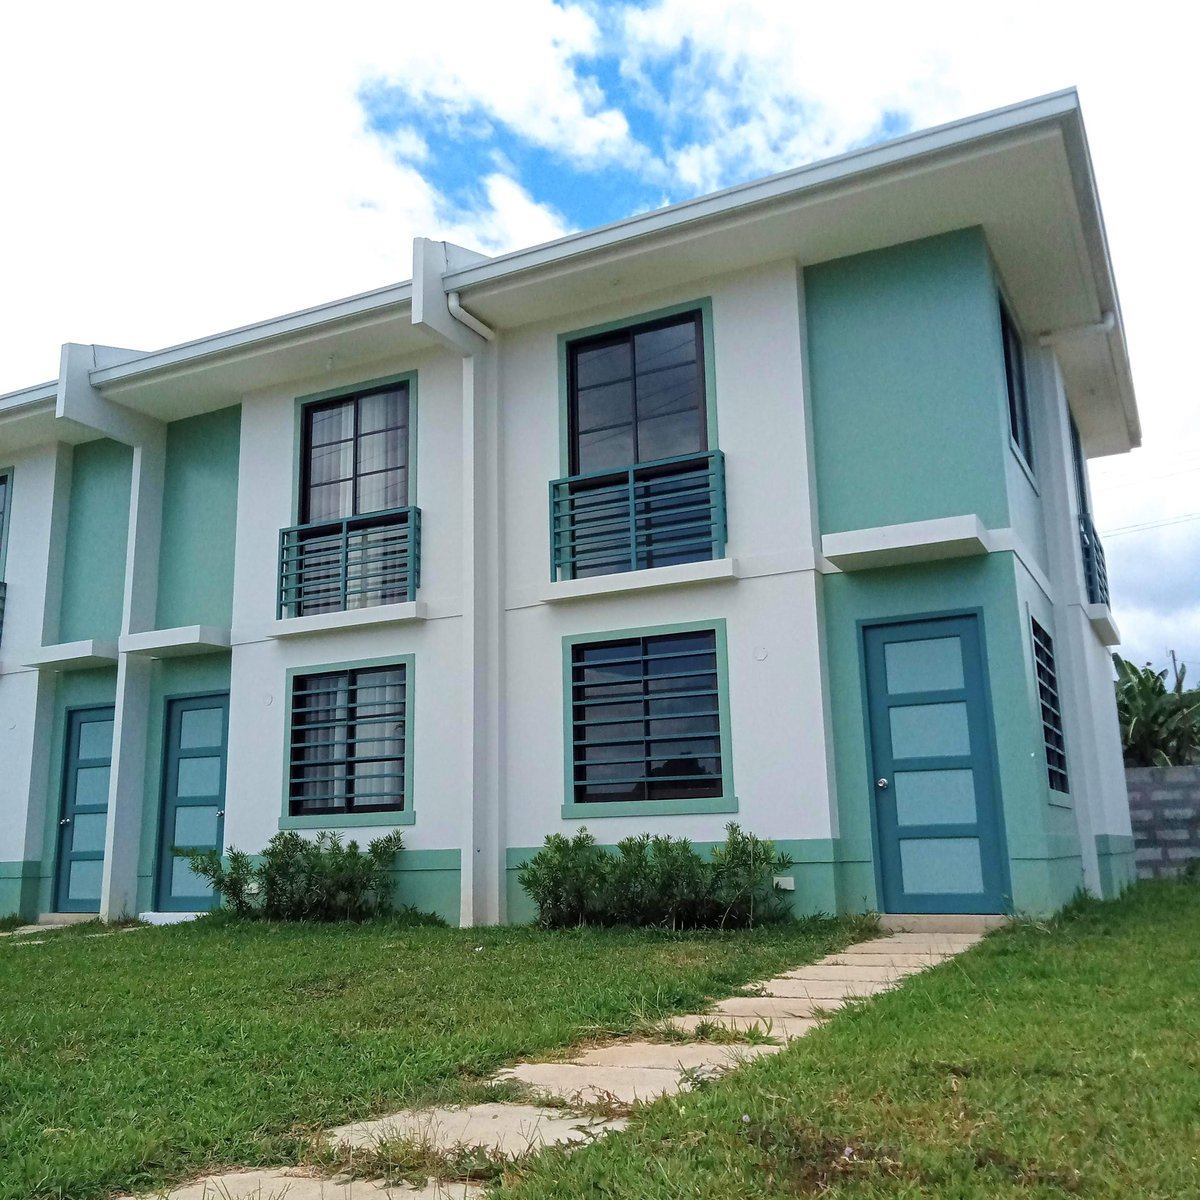 2-bedroom Townhouse For Sale in Tanauan Batangas